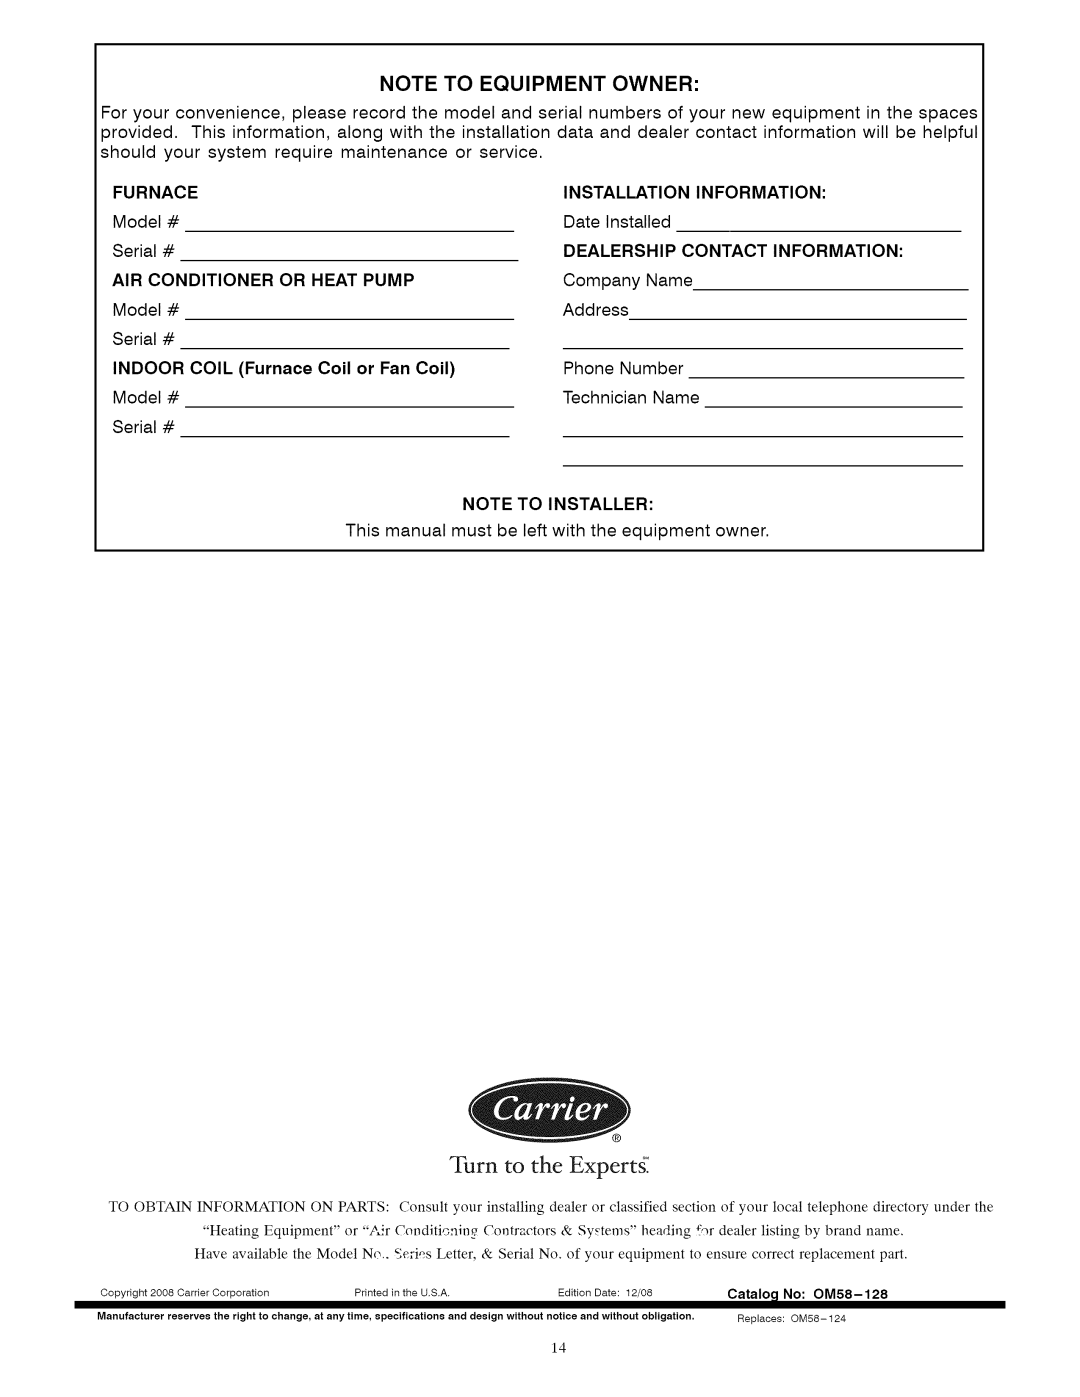 Carrier 58MVC owner manual Turn to the Expertg, Note To Equipment Owner, Installation, Information, Dealership 